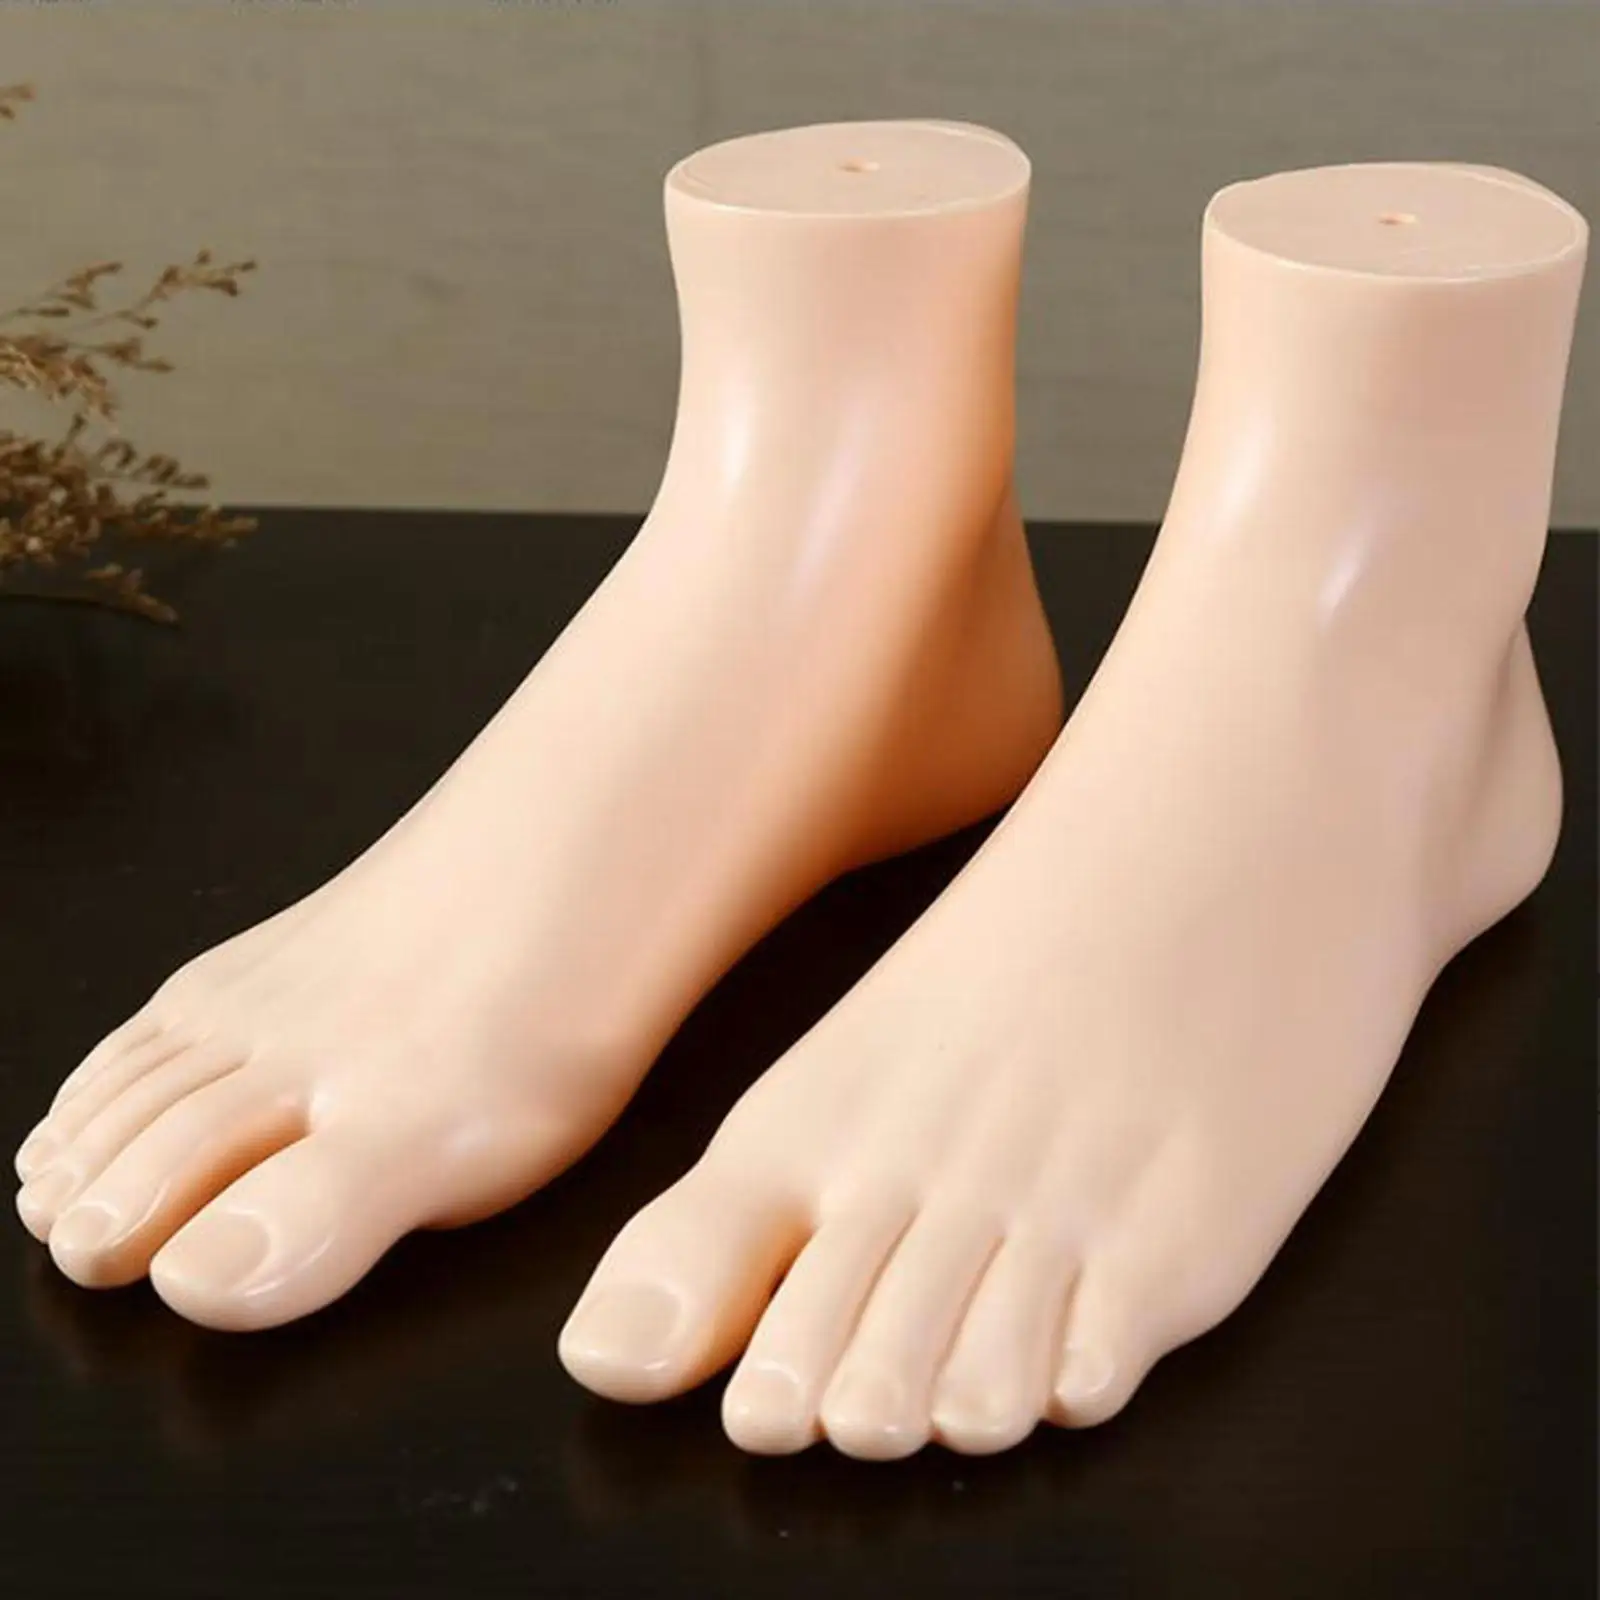 A Pair Mannequin Adult Feet Women Shoes Feet Model for Short Stocking Shop